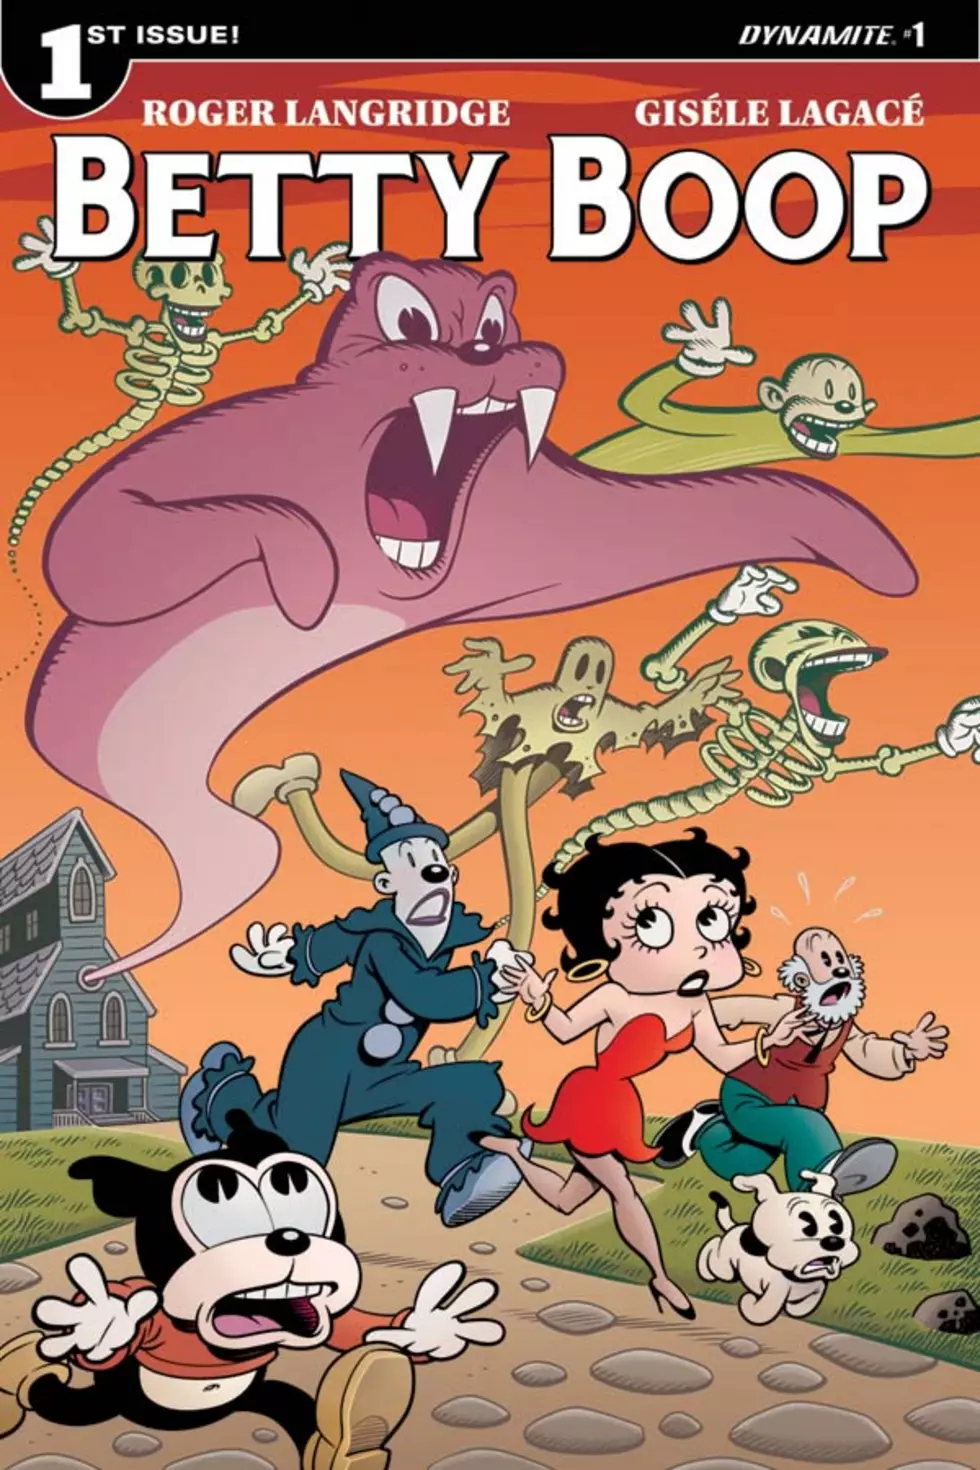 Dynamite Announces New &#8216;Betty Boop&#8217; Series From Langridge And Lagace [SDCC 2016]